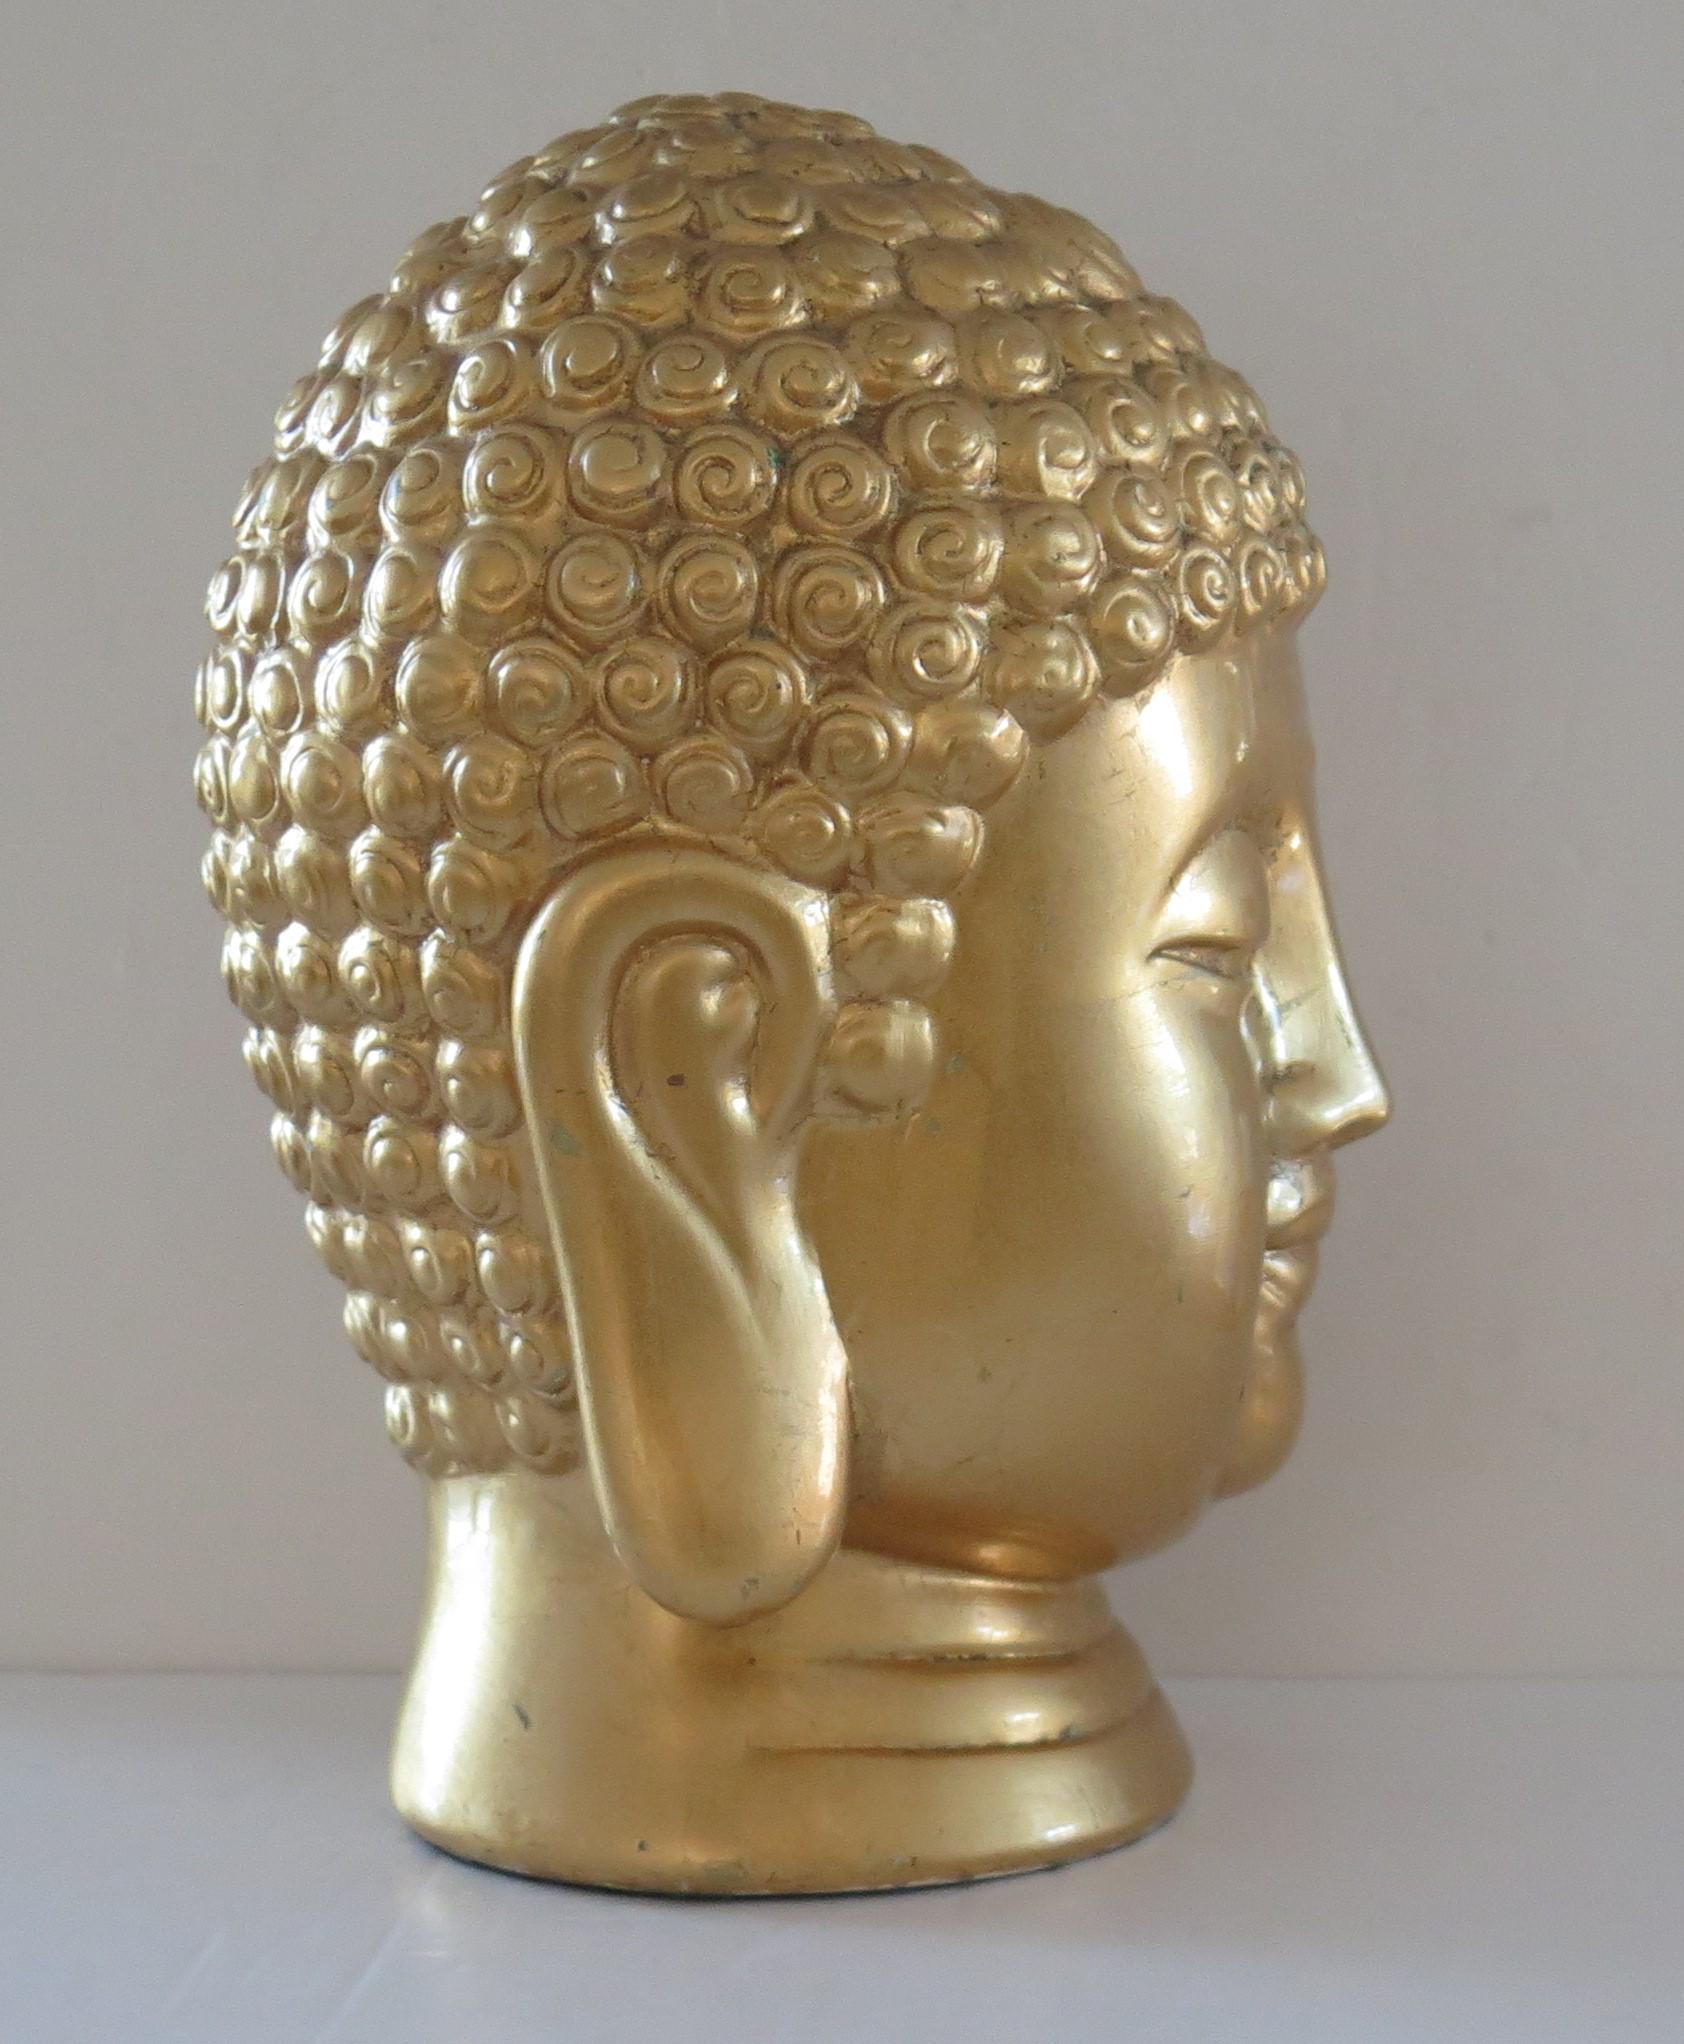 East Asian Large Ceramic Buddha Head or Bust with Real Gold Leaf, Asian Circa 1920s For Sale